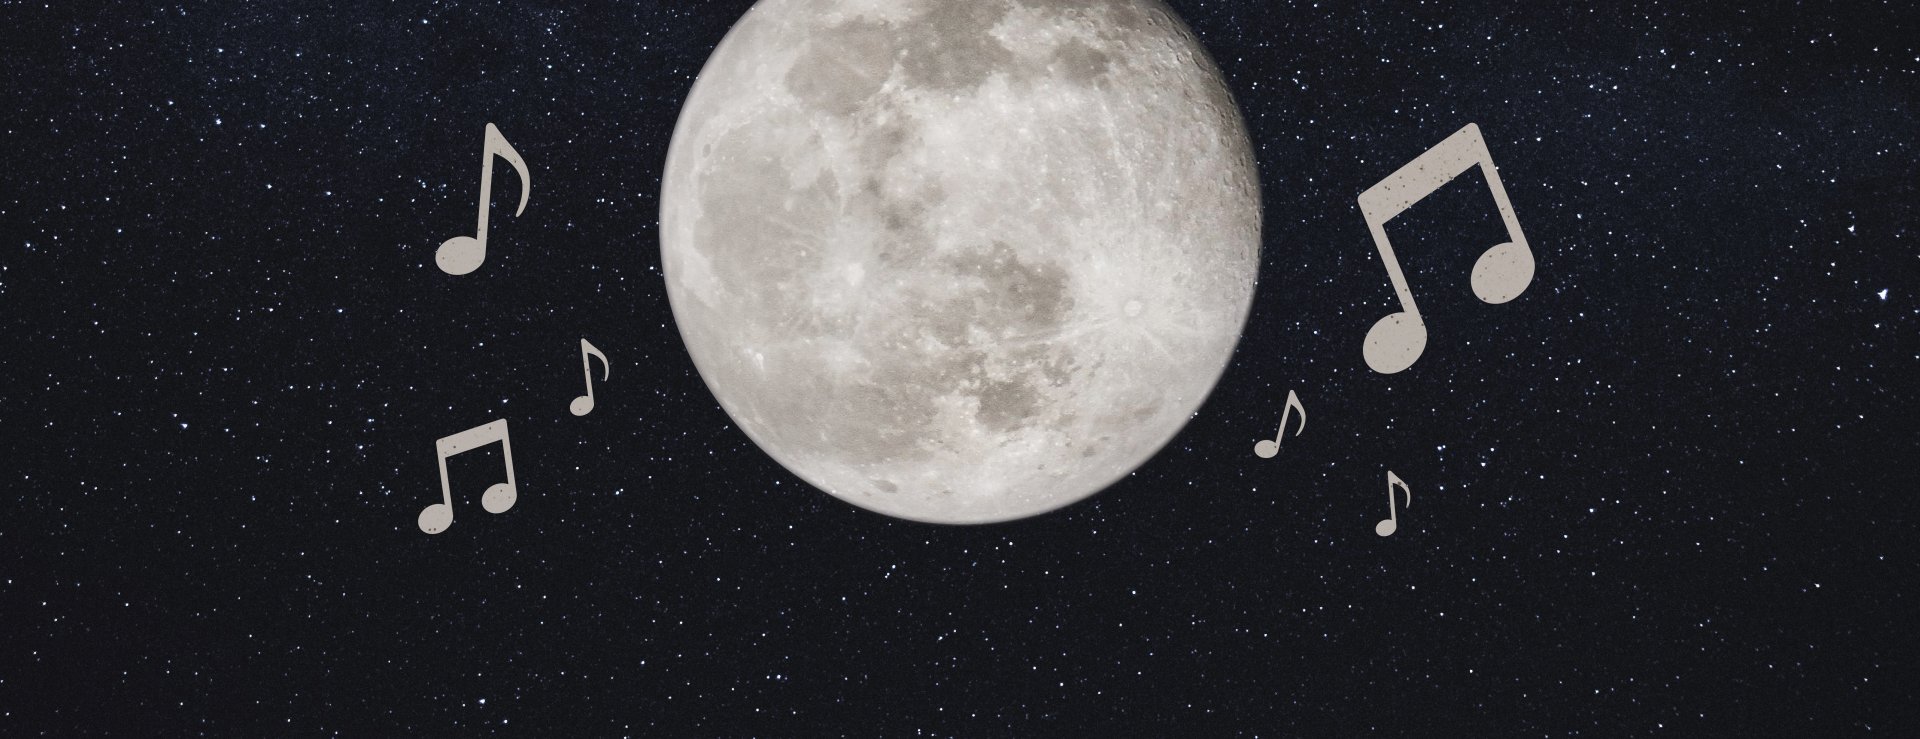 Full moon surrounded by musical notes in a starry night sky.